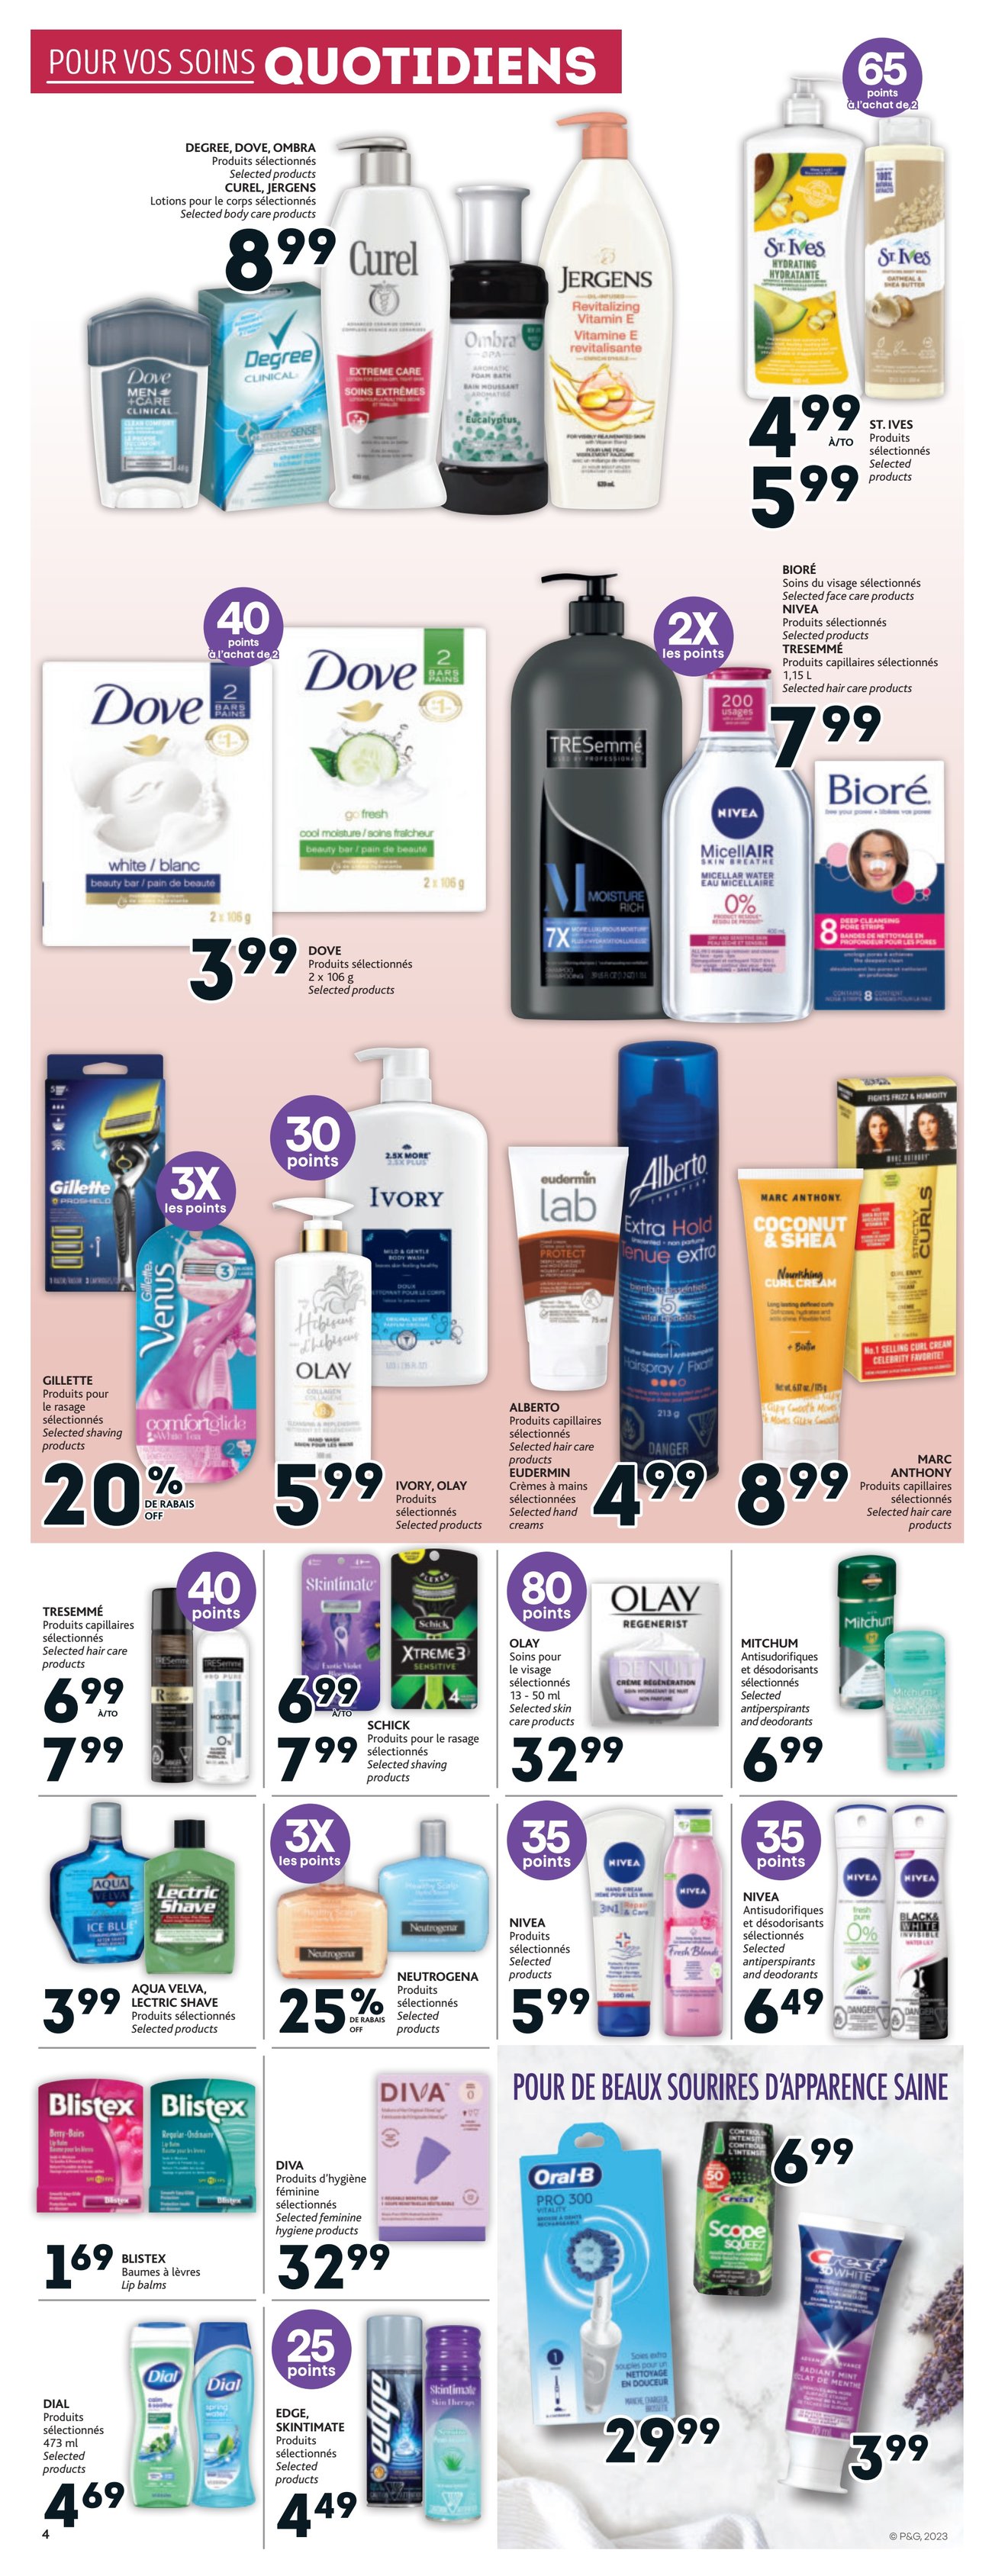 Brunet - Weekly Flyer Specials - Page 5